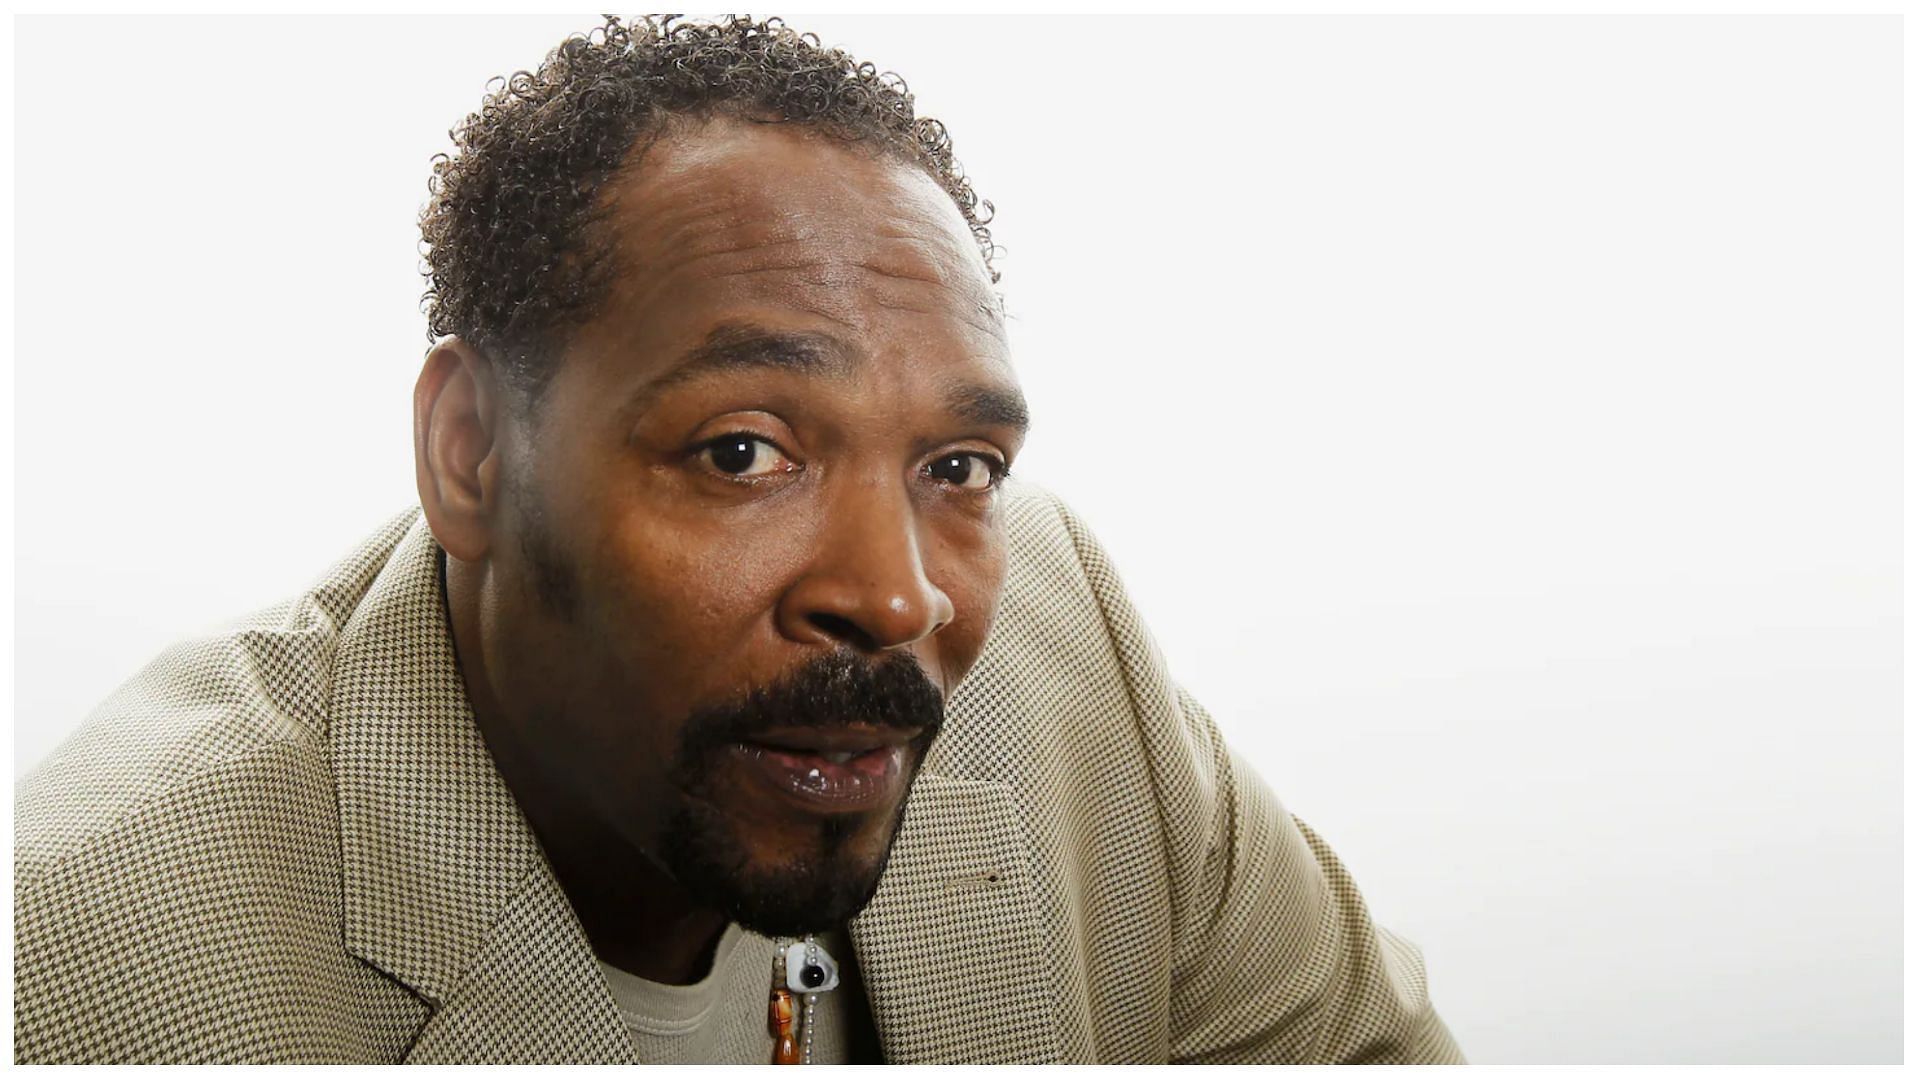 Rodney King drowned in his swimming pool in 2012 (image via Matt Sayles, The Associated Press)